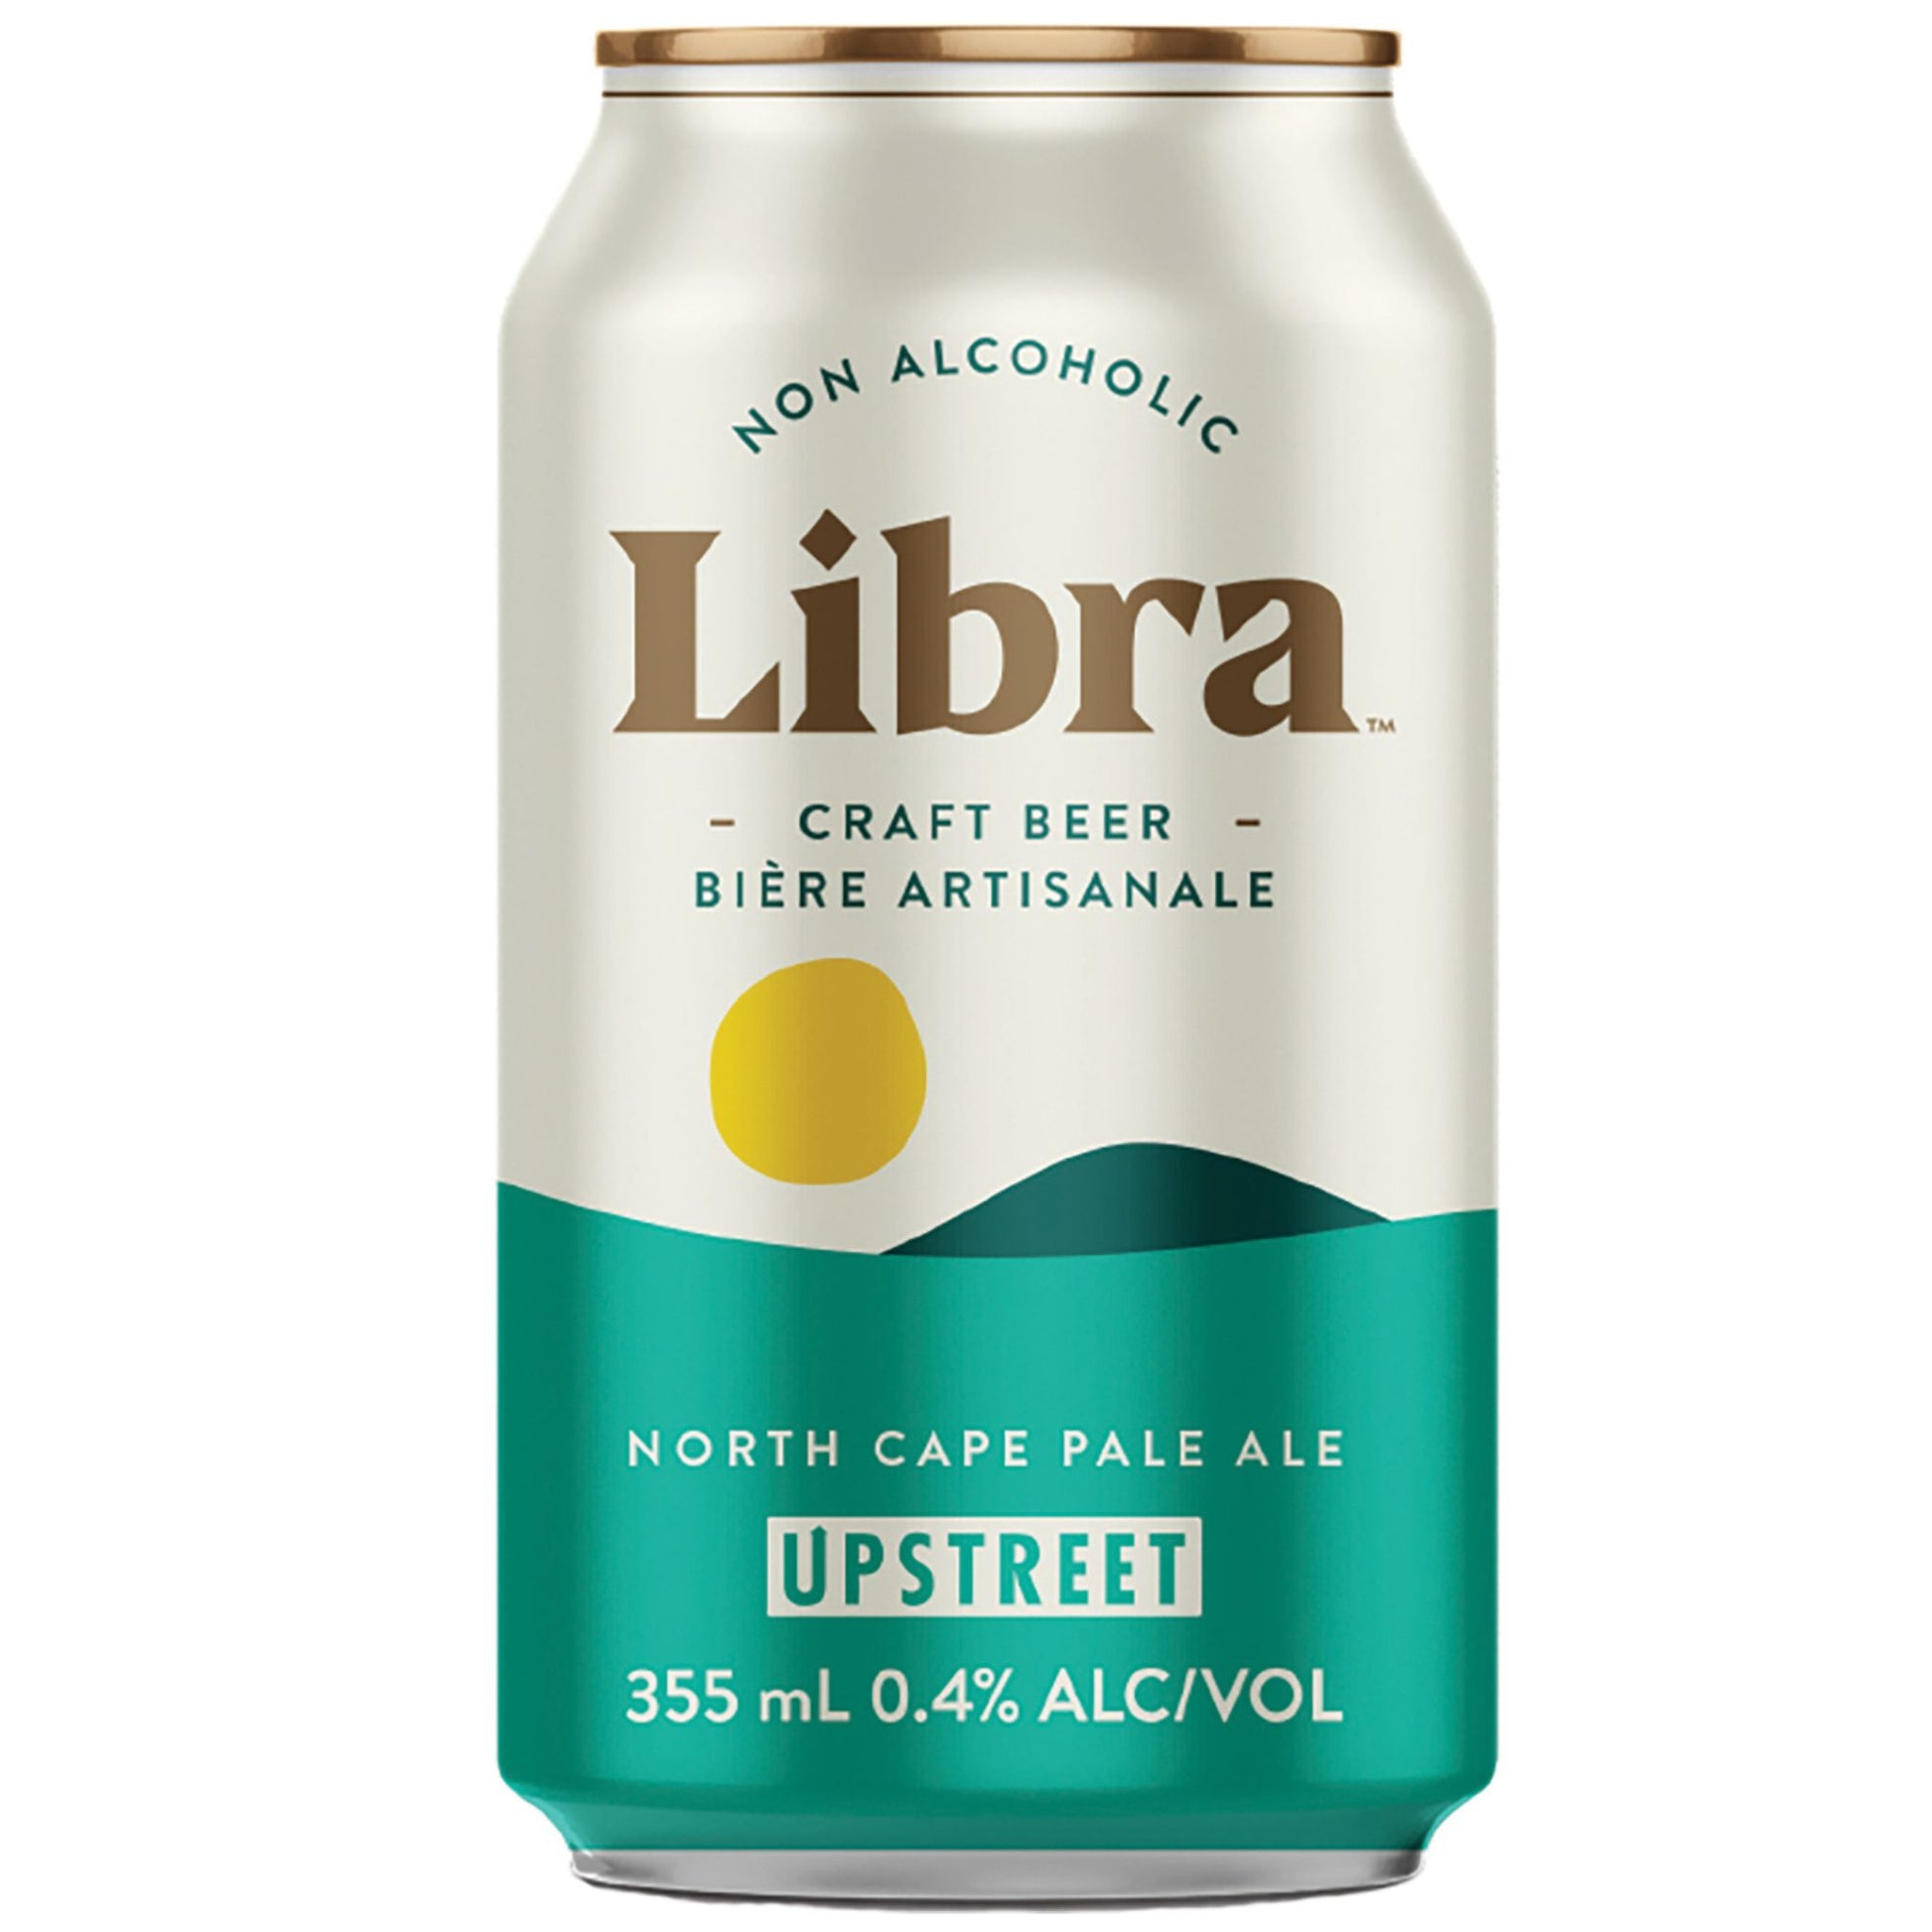 Libra Non-Alcoholic Beer Pale Ale is available at Knyota Non-Alcoholic Drinks.